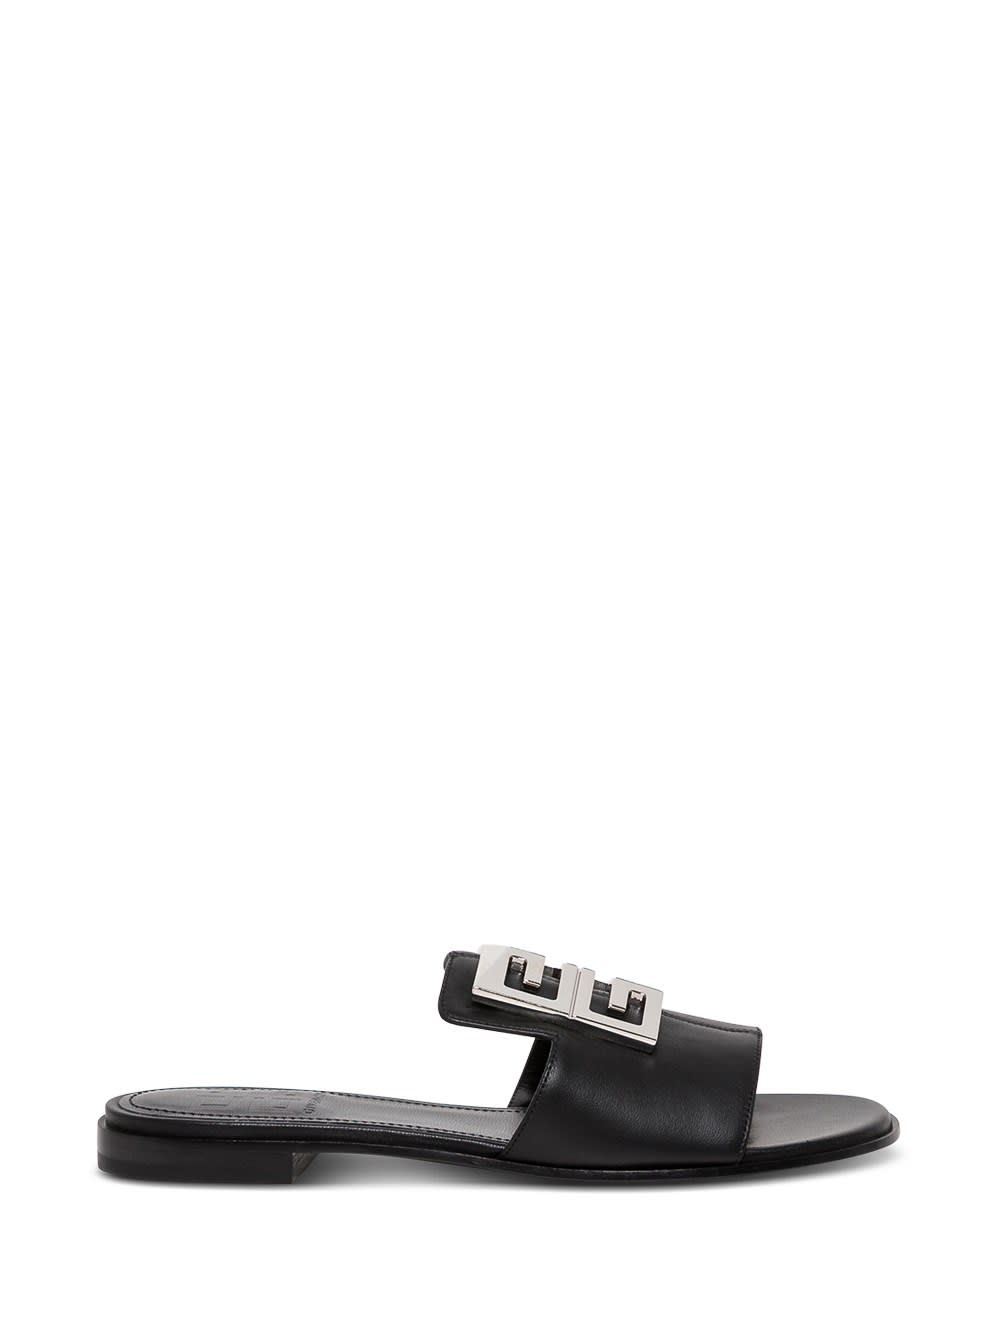 Buy Givenchy 4g Flat Sandals In Black Leather online, shop Givenchy shoes with free shipping